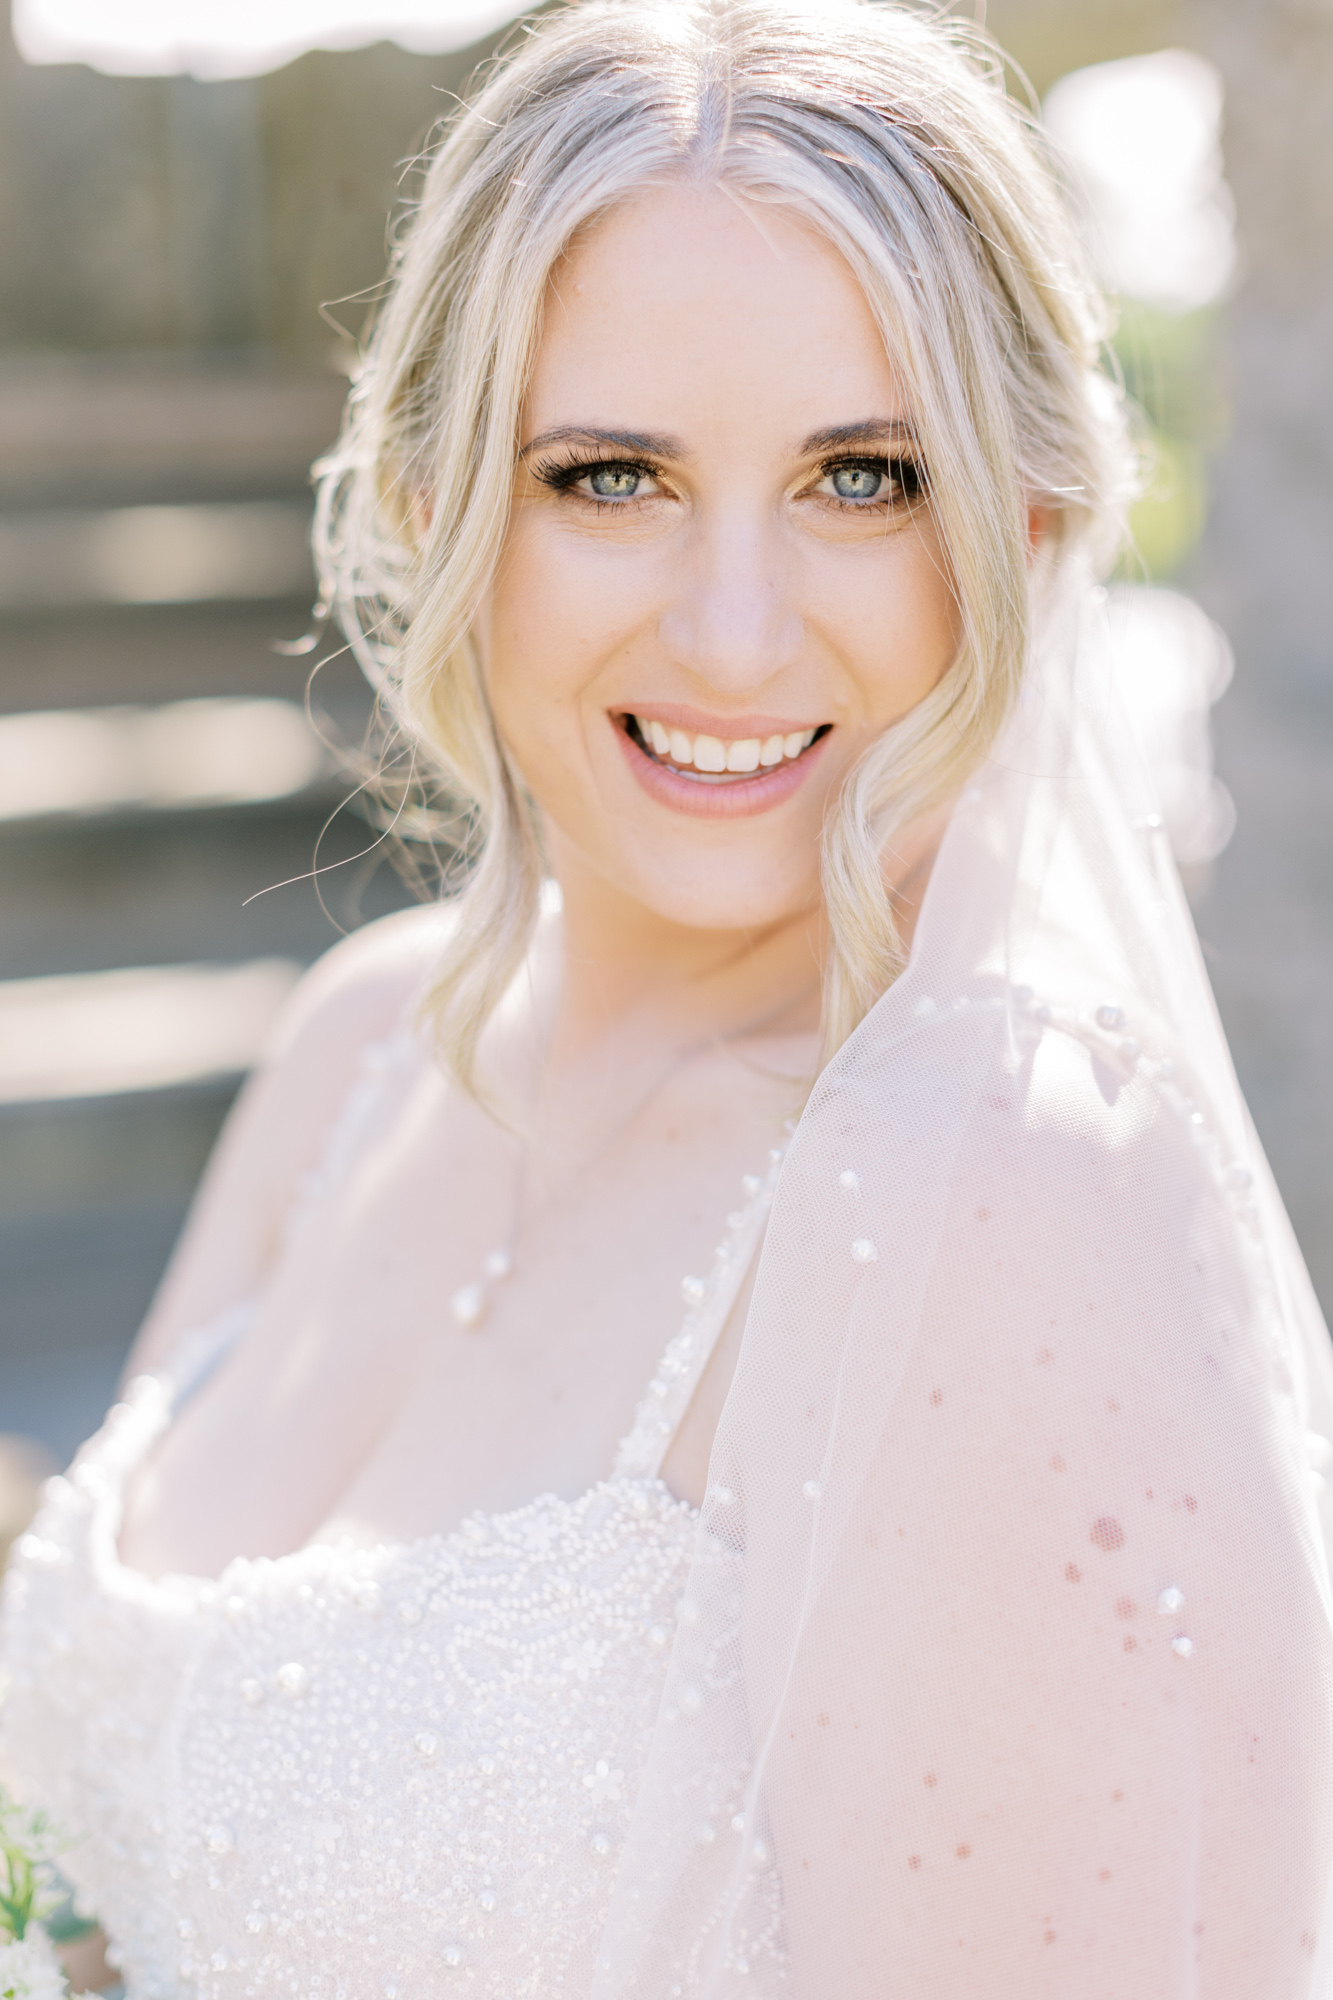 Portrait of bride, smiling with a pearl veil, taken by Toronto Wedding Photographer Paula Visco photography